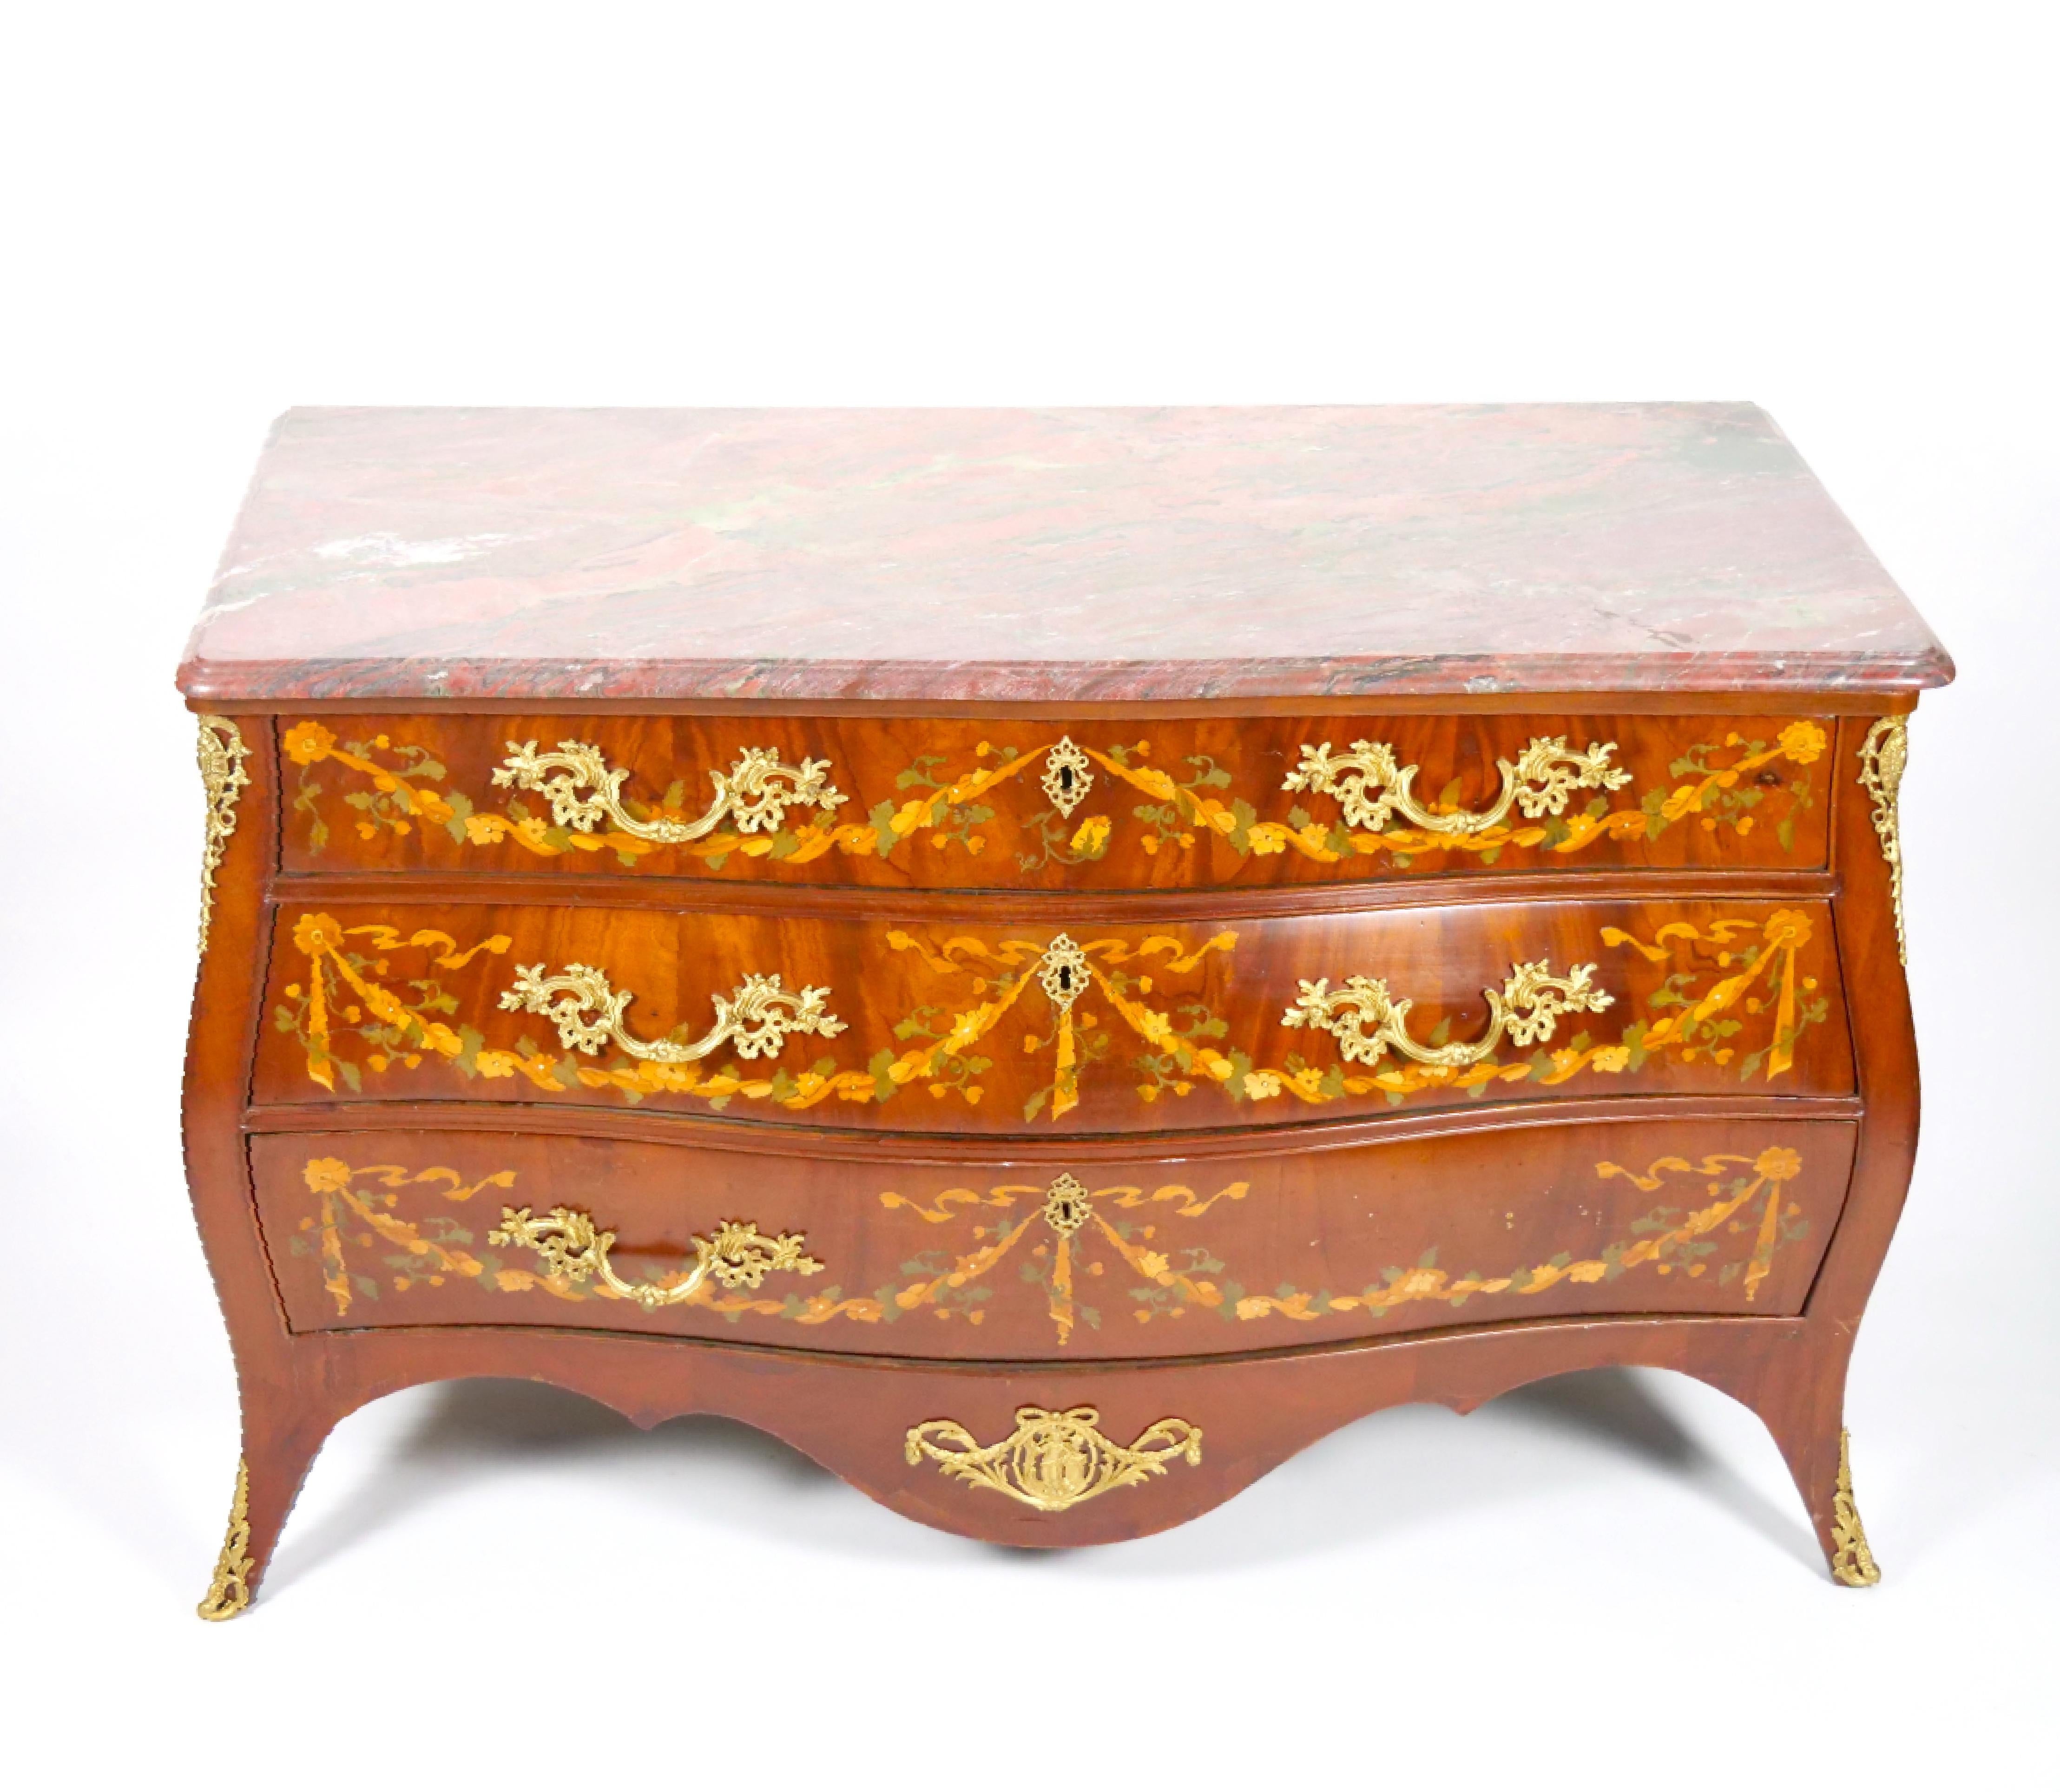 French Antique Marble Top Floral Marquetry Inlaid Mahogany Commode / Credenza For Sale